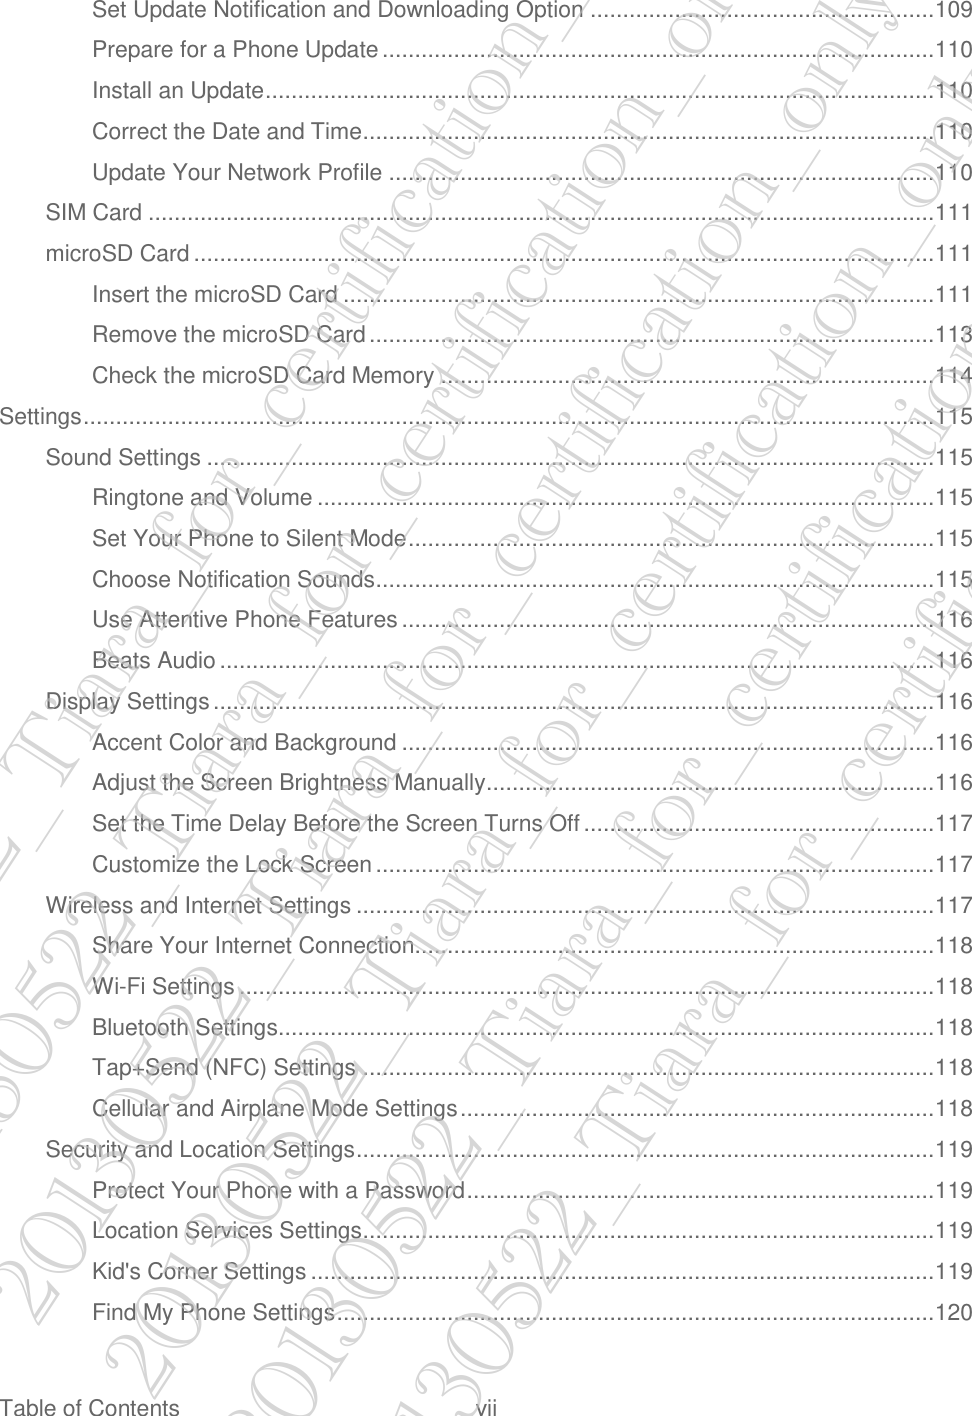  Table of Contents  vii Set Update Notification and Downloading Option ..................................................... 109 Prepare for a Phone Update ..................................................................................... 110 Install an Update ....................................................................................................... 110 Correct the Date and Time ........................................................................................ 110 Update Your Network Profile .................................................................................... 110 SIM Card ......................................................................................................................... 111 microSD Card .................................................................................................................. 111 Insert the microSD Card ........................................................................................... 111 Remove the microSD Card ....................................................................................... 113 Check the microSD Card Memory ............................................................................ 114 Settings ................................................................................................................................... 115 Sound Settings ................................................................................................................ 115 Ringtone and Volume ............................................................................................... 115 Set Your Phone to Silent Mode ................................................................................. 115 Choose Notification Sounds ...................................................................................... 115 Use Attentive Phone Features .................................................................................. 116 Beats Audio .............................................................................................................. 116 Display Settings ............................................................................................................... 116 Accent Color and Background .................................................................................. 116 Adjust the Screen Brightness Manually ..................................................................... 116 Set the Time Delay Before the Screen Turns Off ...................................................... 117 Customize the Lock Screen ...................................................................................... 117 Wireless and Internet Settings ......................................................................................... 117 Share Your Internet Connection................................................................................ 118 Wi-Fi Settings ........................................................................................................... 118 Bluetooth Settings..................................................................................................... 118 Tap+Send (NFC) Settings ........................................................................................ 118 Cellular and Airplane Mode Settings ......................................................................... 118 Security and Location Settings ......................................................................................... 119 Protect Your Phone with a Password ........................................................................ 119 Location Services Settings ........................................................................................ 119 Kid&apos;s Corner Settings ................................................................................................ 119 Find My Phone Settings ............................................................................................ 120 20130522_Tiara_for_certification_only 20130522_Tiara_for_certification_only 20130522_Tiara_for_certification_only 20130522_Tiara_for_certification_only 20130522_Tiara_for_certification_only 20130522_Tiara_for_certification_only